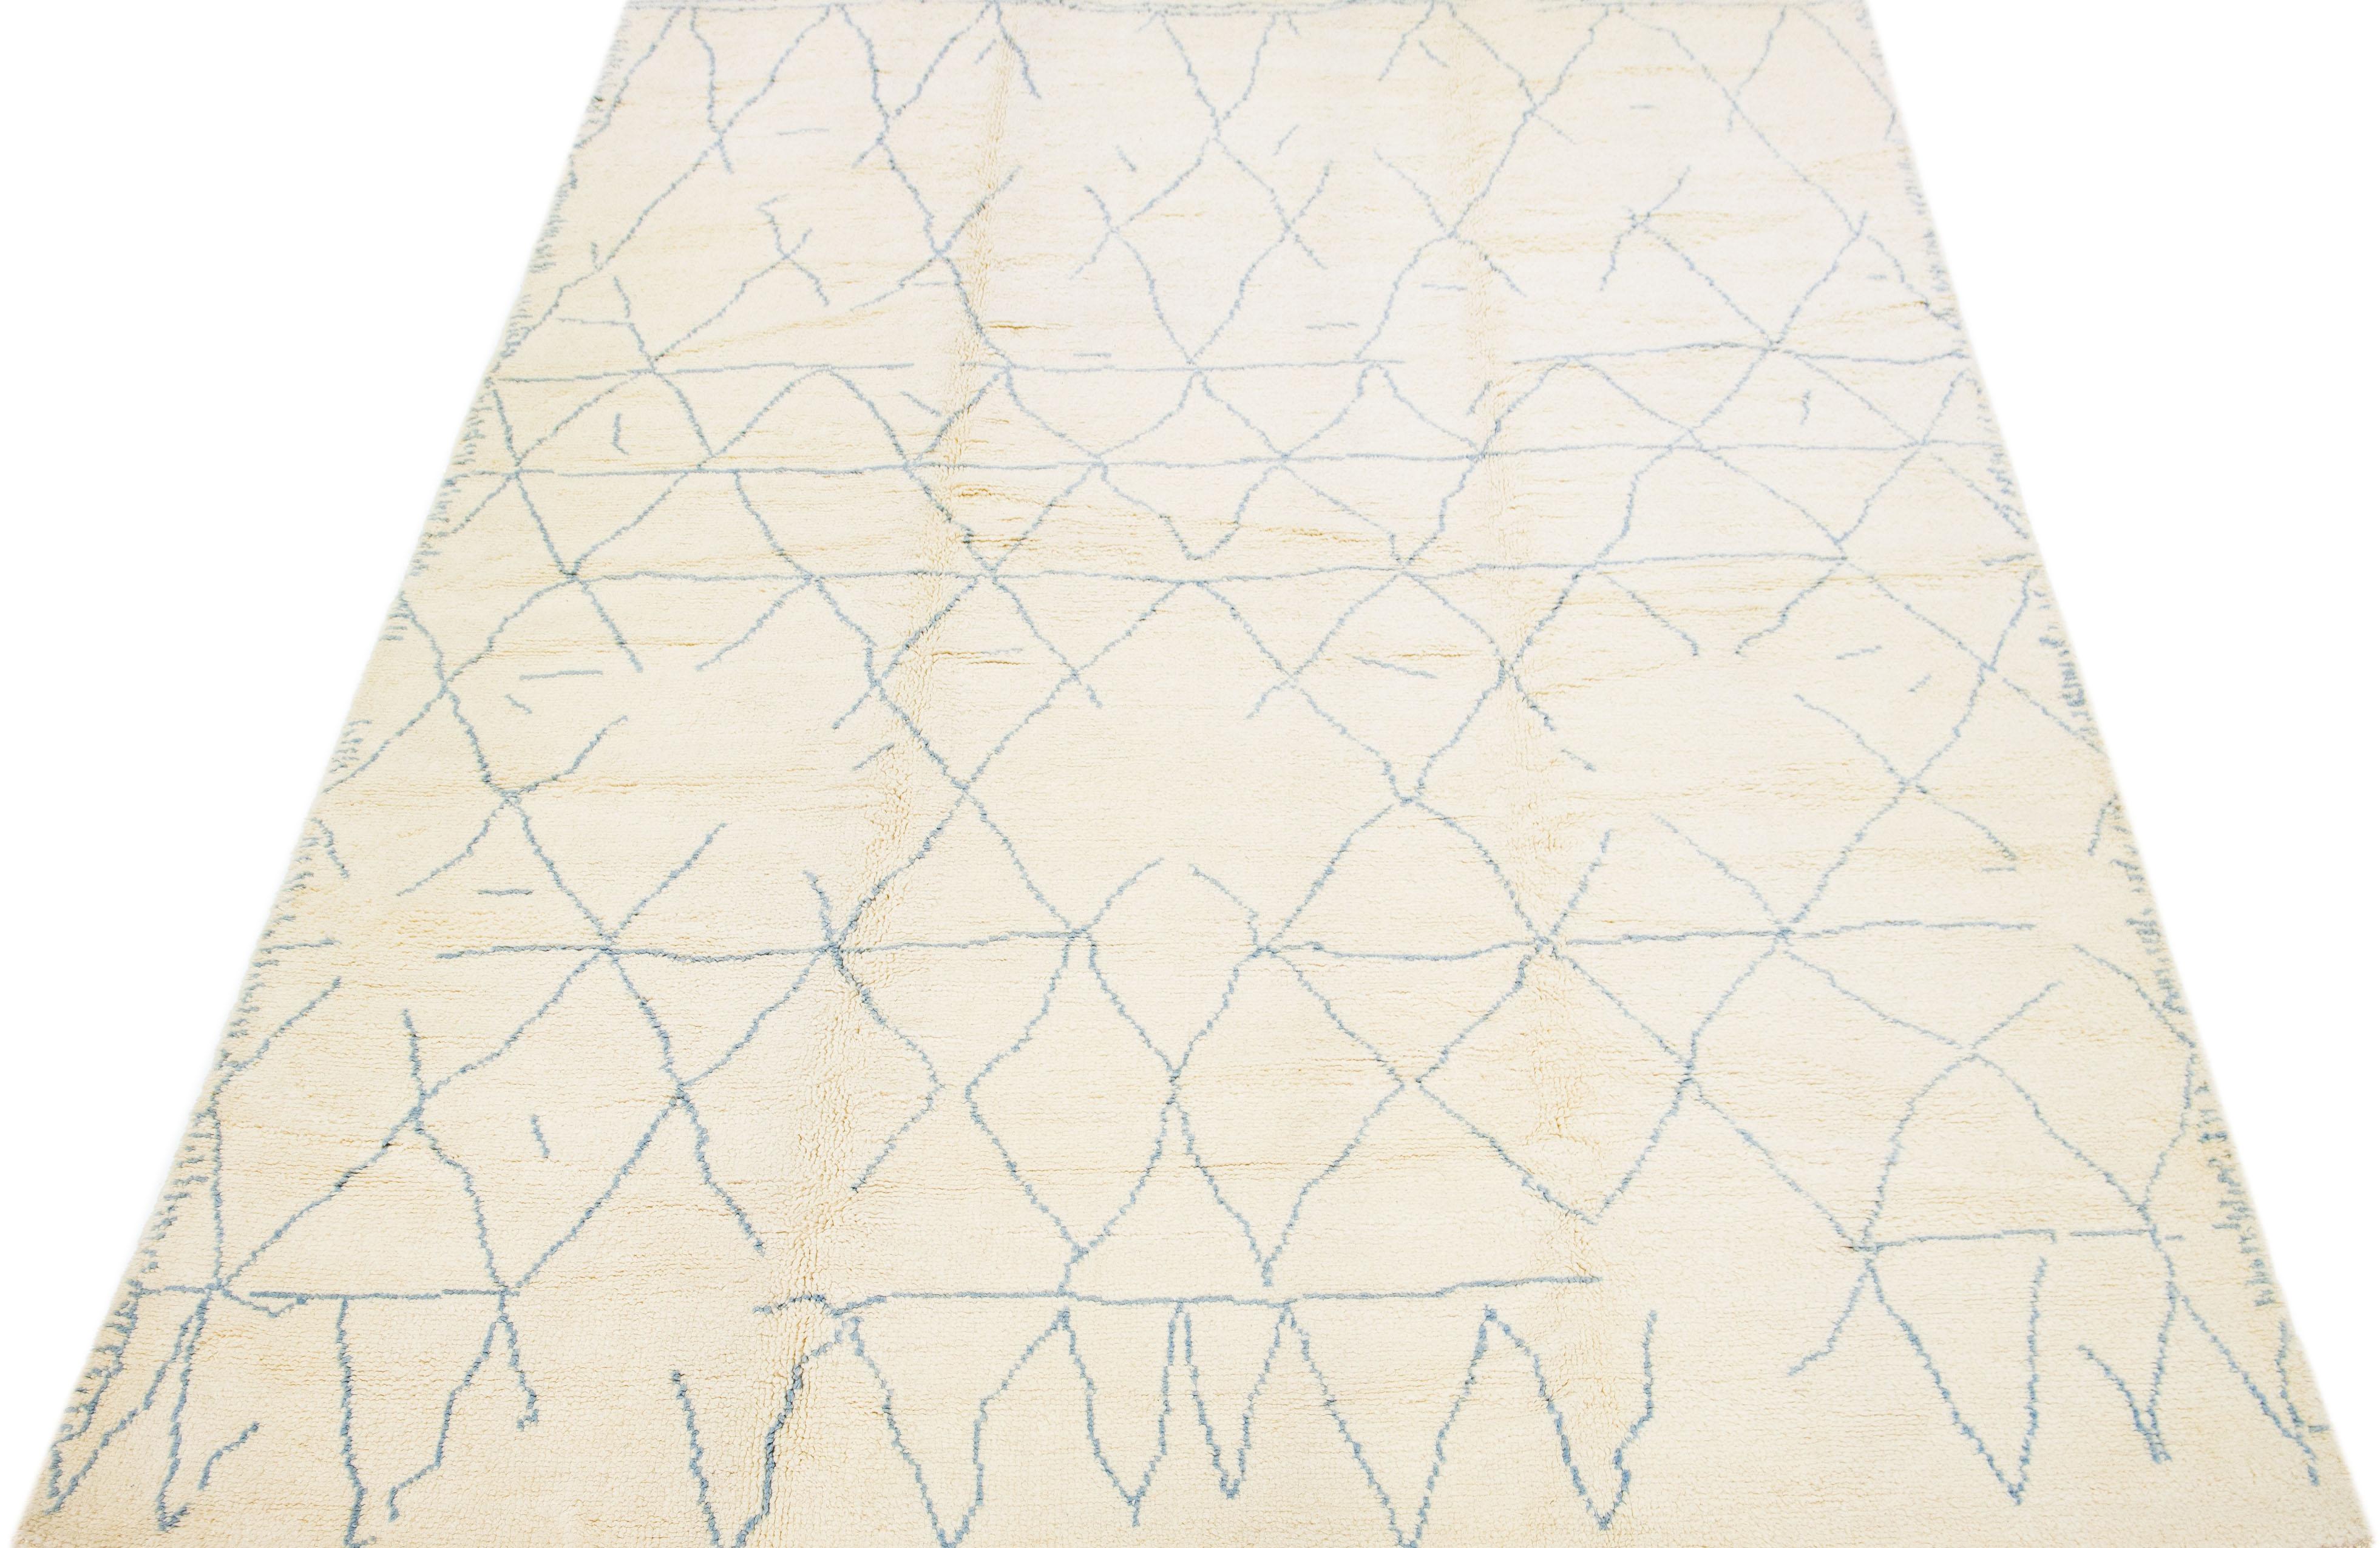 Bring a touch of luxury to your home with our exquisite hand knotted wool rug. Boasting a modern abstract motif, its beige field is contrasted with tantalizing blue hues, creating an enchanted Moroccan pattern. This area rug is ideal for a